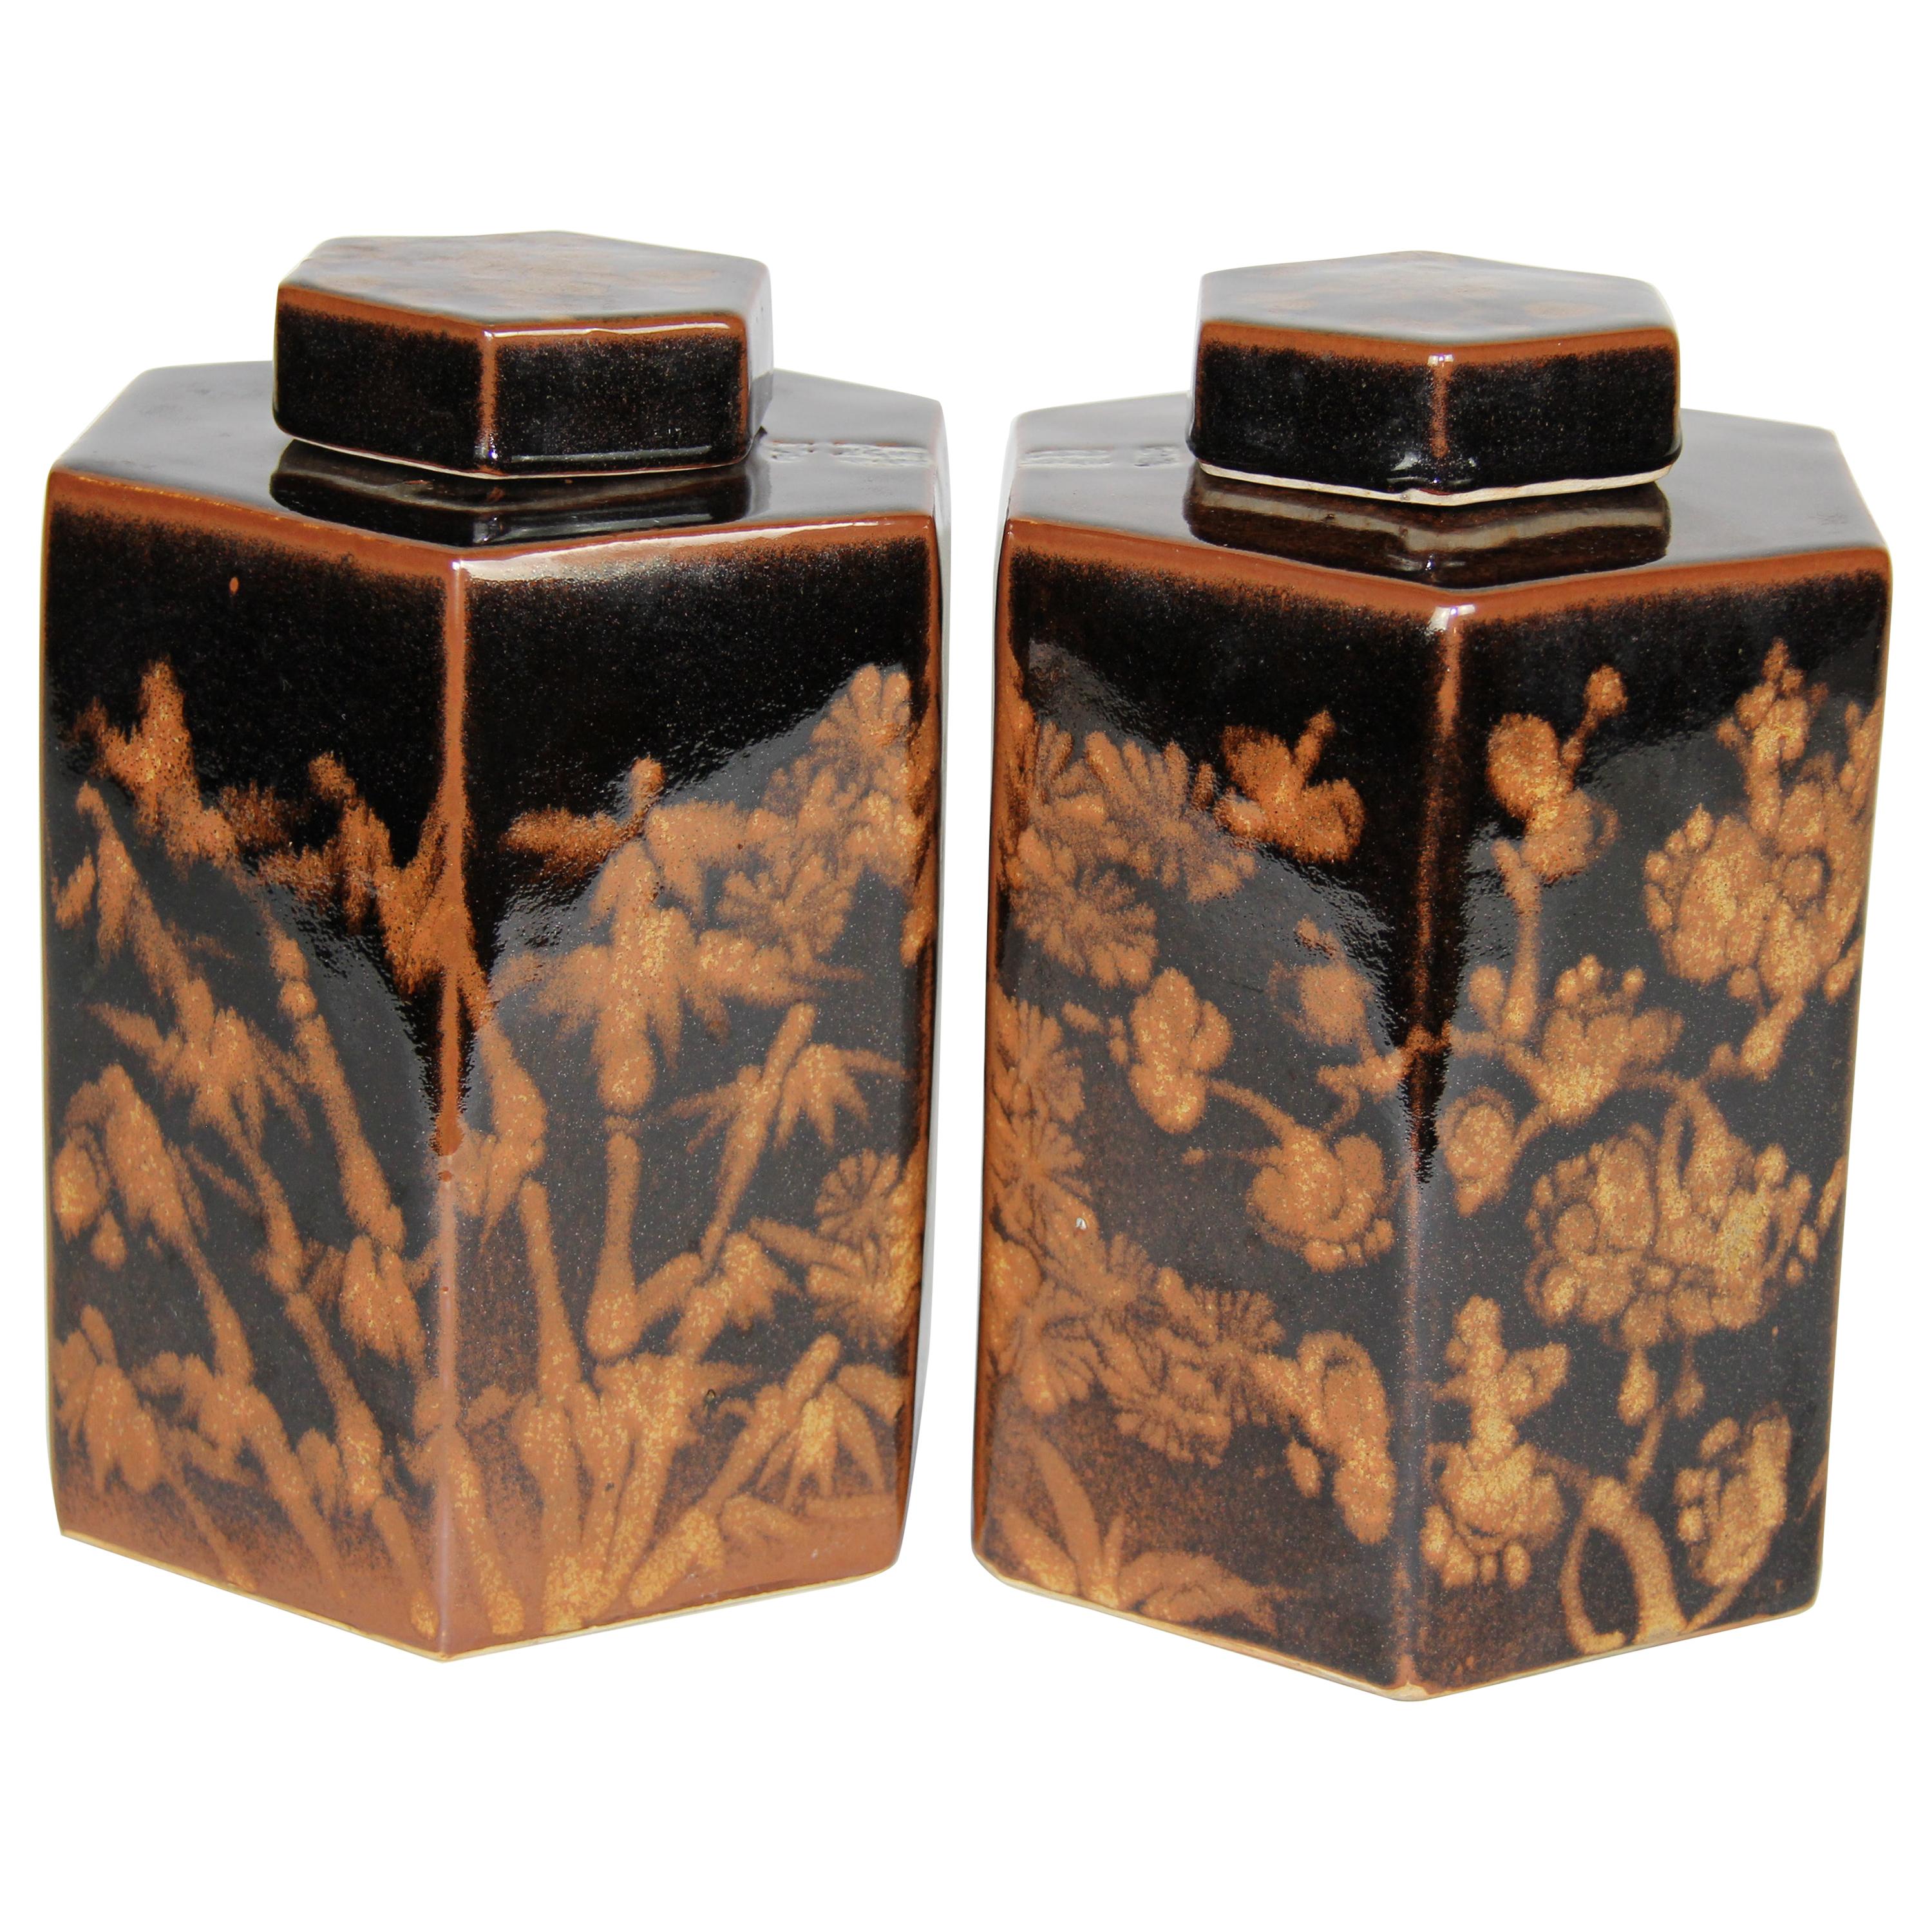 Pair of Hand Painted Porcelain Tea Caddies with Floral and Bamboo Motifs For Sale